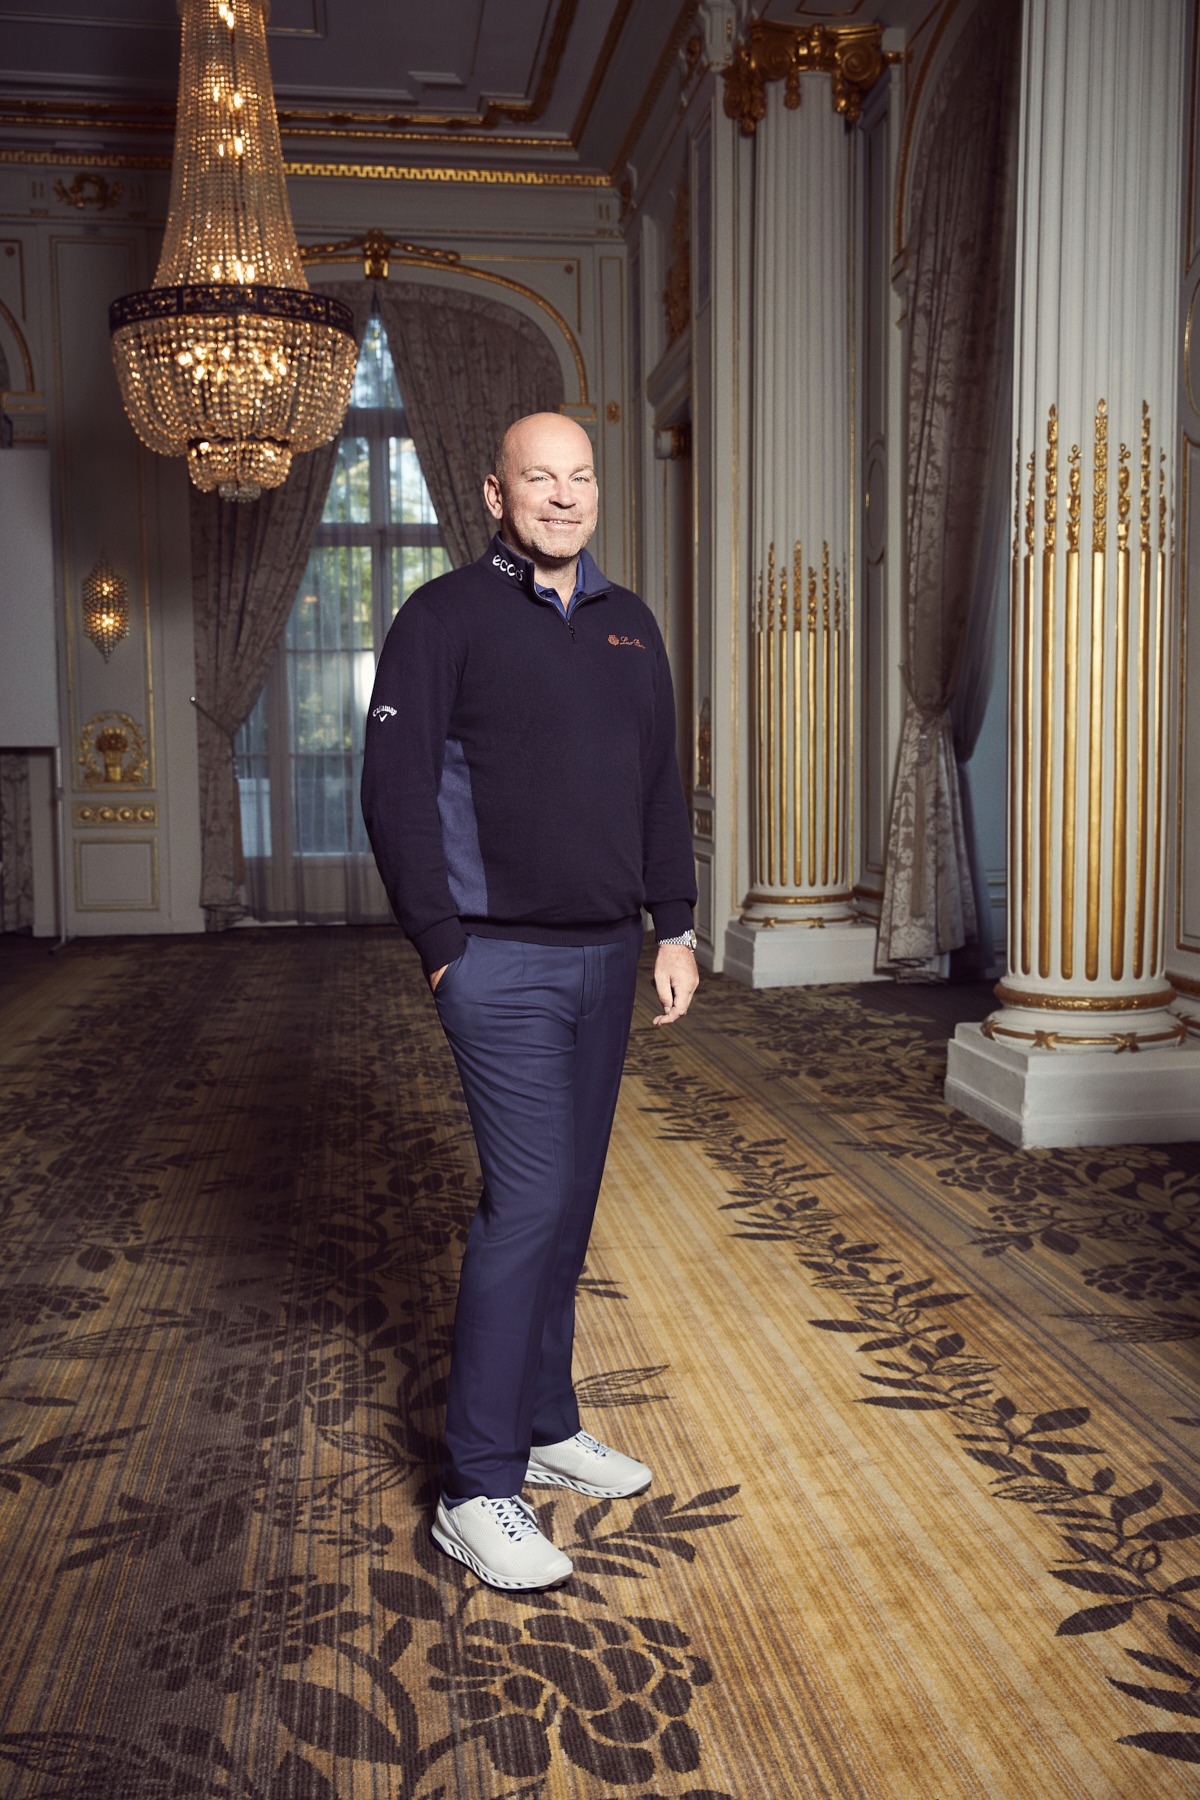 ecco thomas björn campaign waldorf astoria trianon palace versailles by Mike Meyer Photography